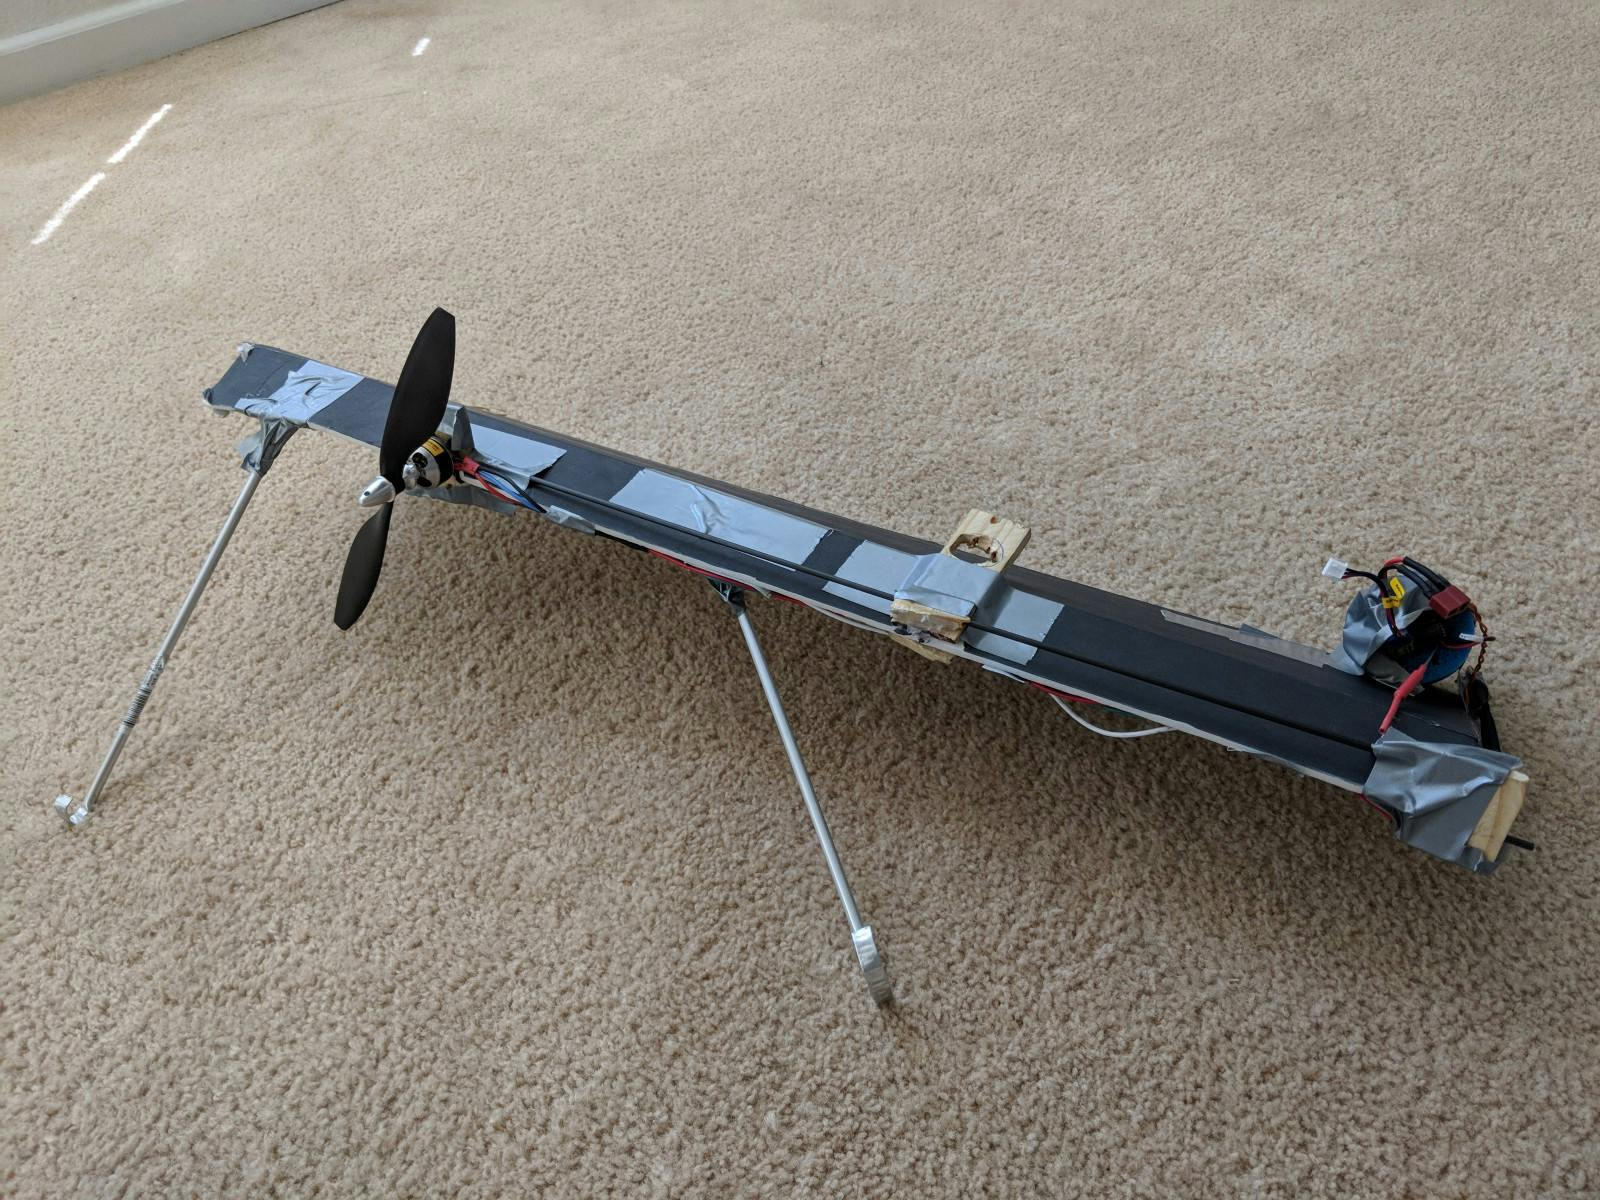 /how-to-scratch-build-a-monocopter-an-airplane-with-a-missing-wing-8df6bfca58ab feature image